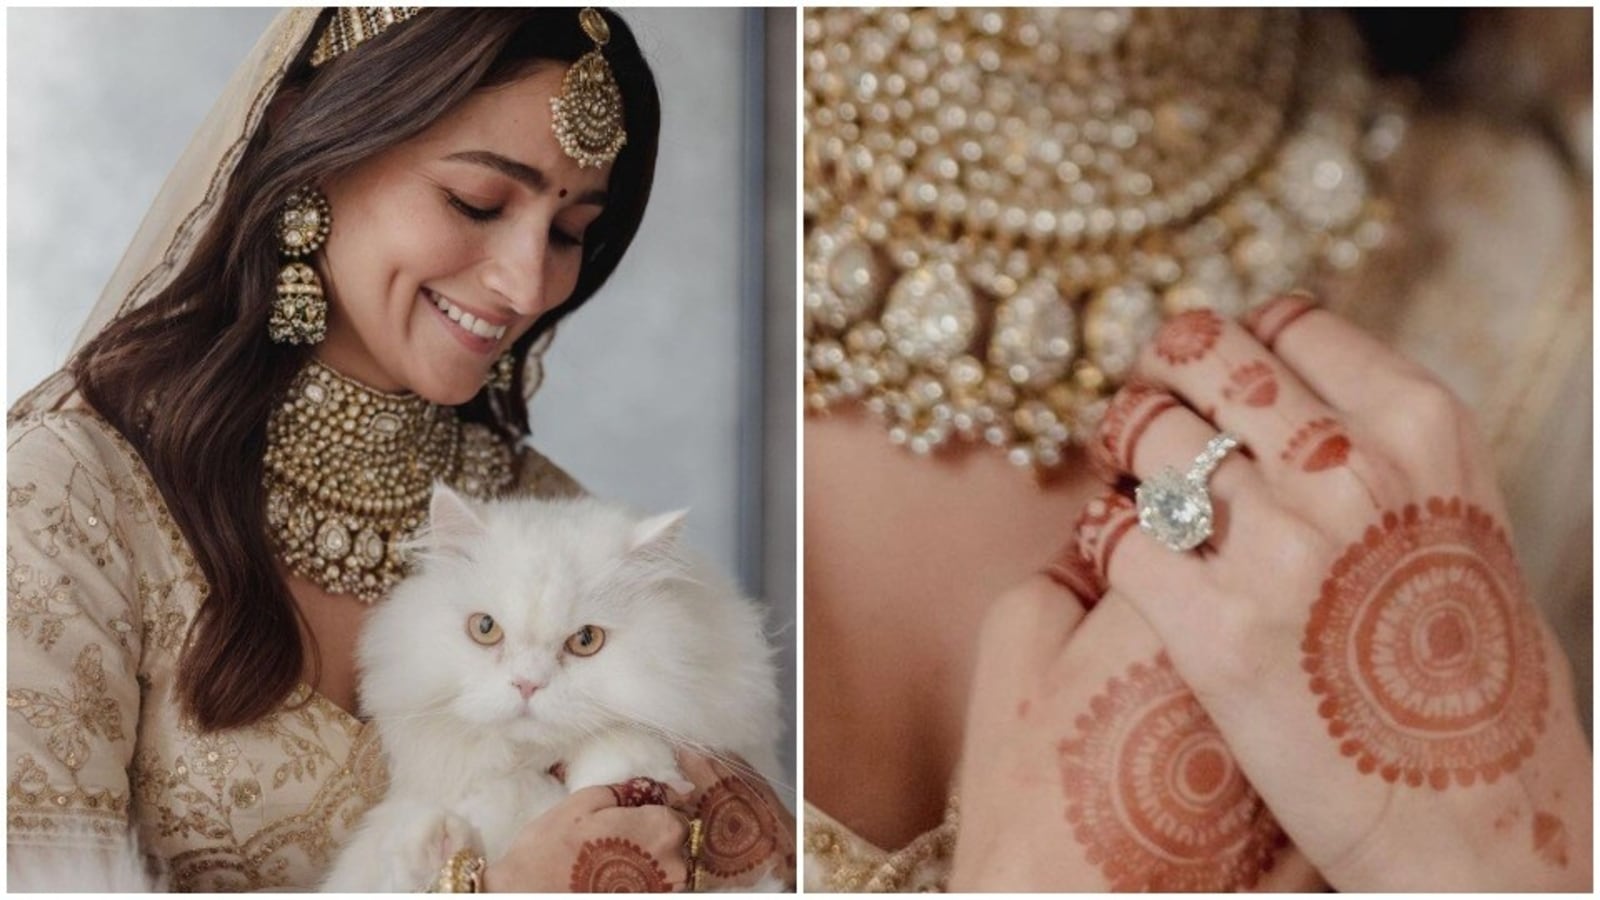 Alia Bhatt poses with cat in new pics from wedding, shows enormous ring; Riddhima Sahni calls her ‘my most beautiful’